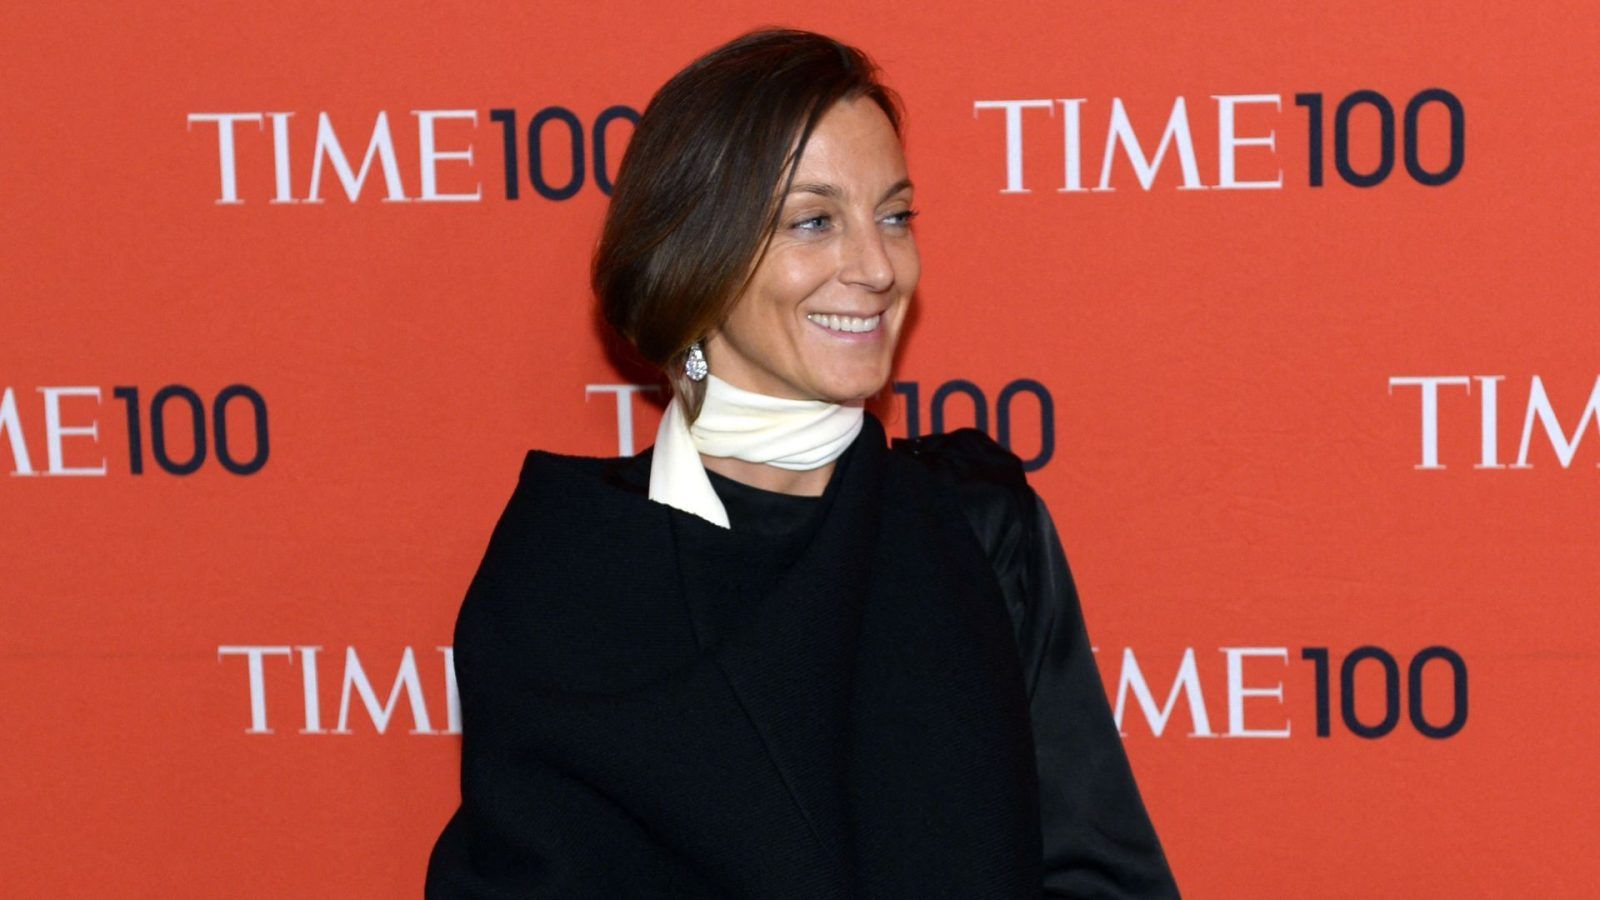 Phoebe Philo Announces New Fashion Brand Backed by LVMH